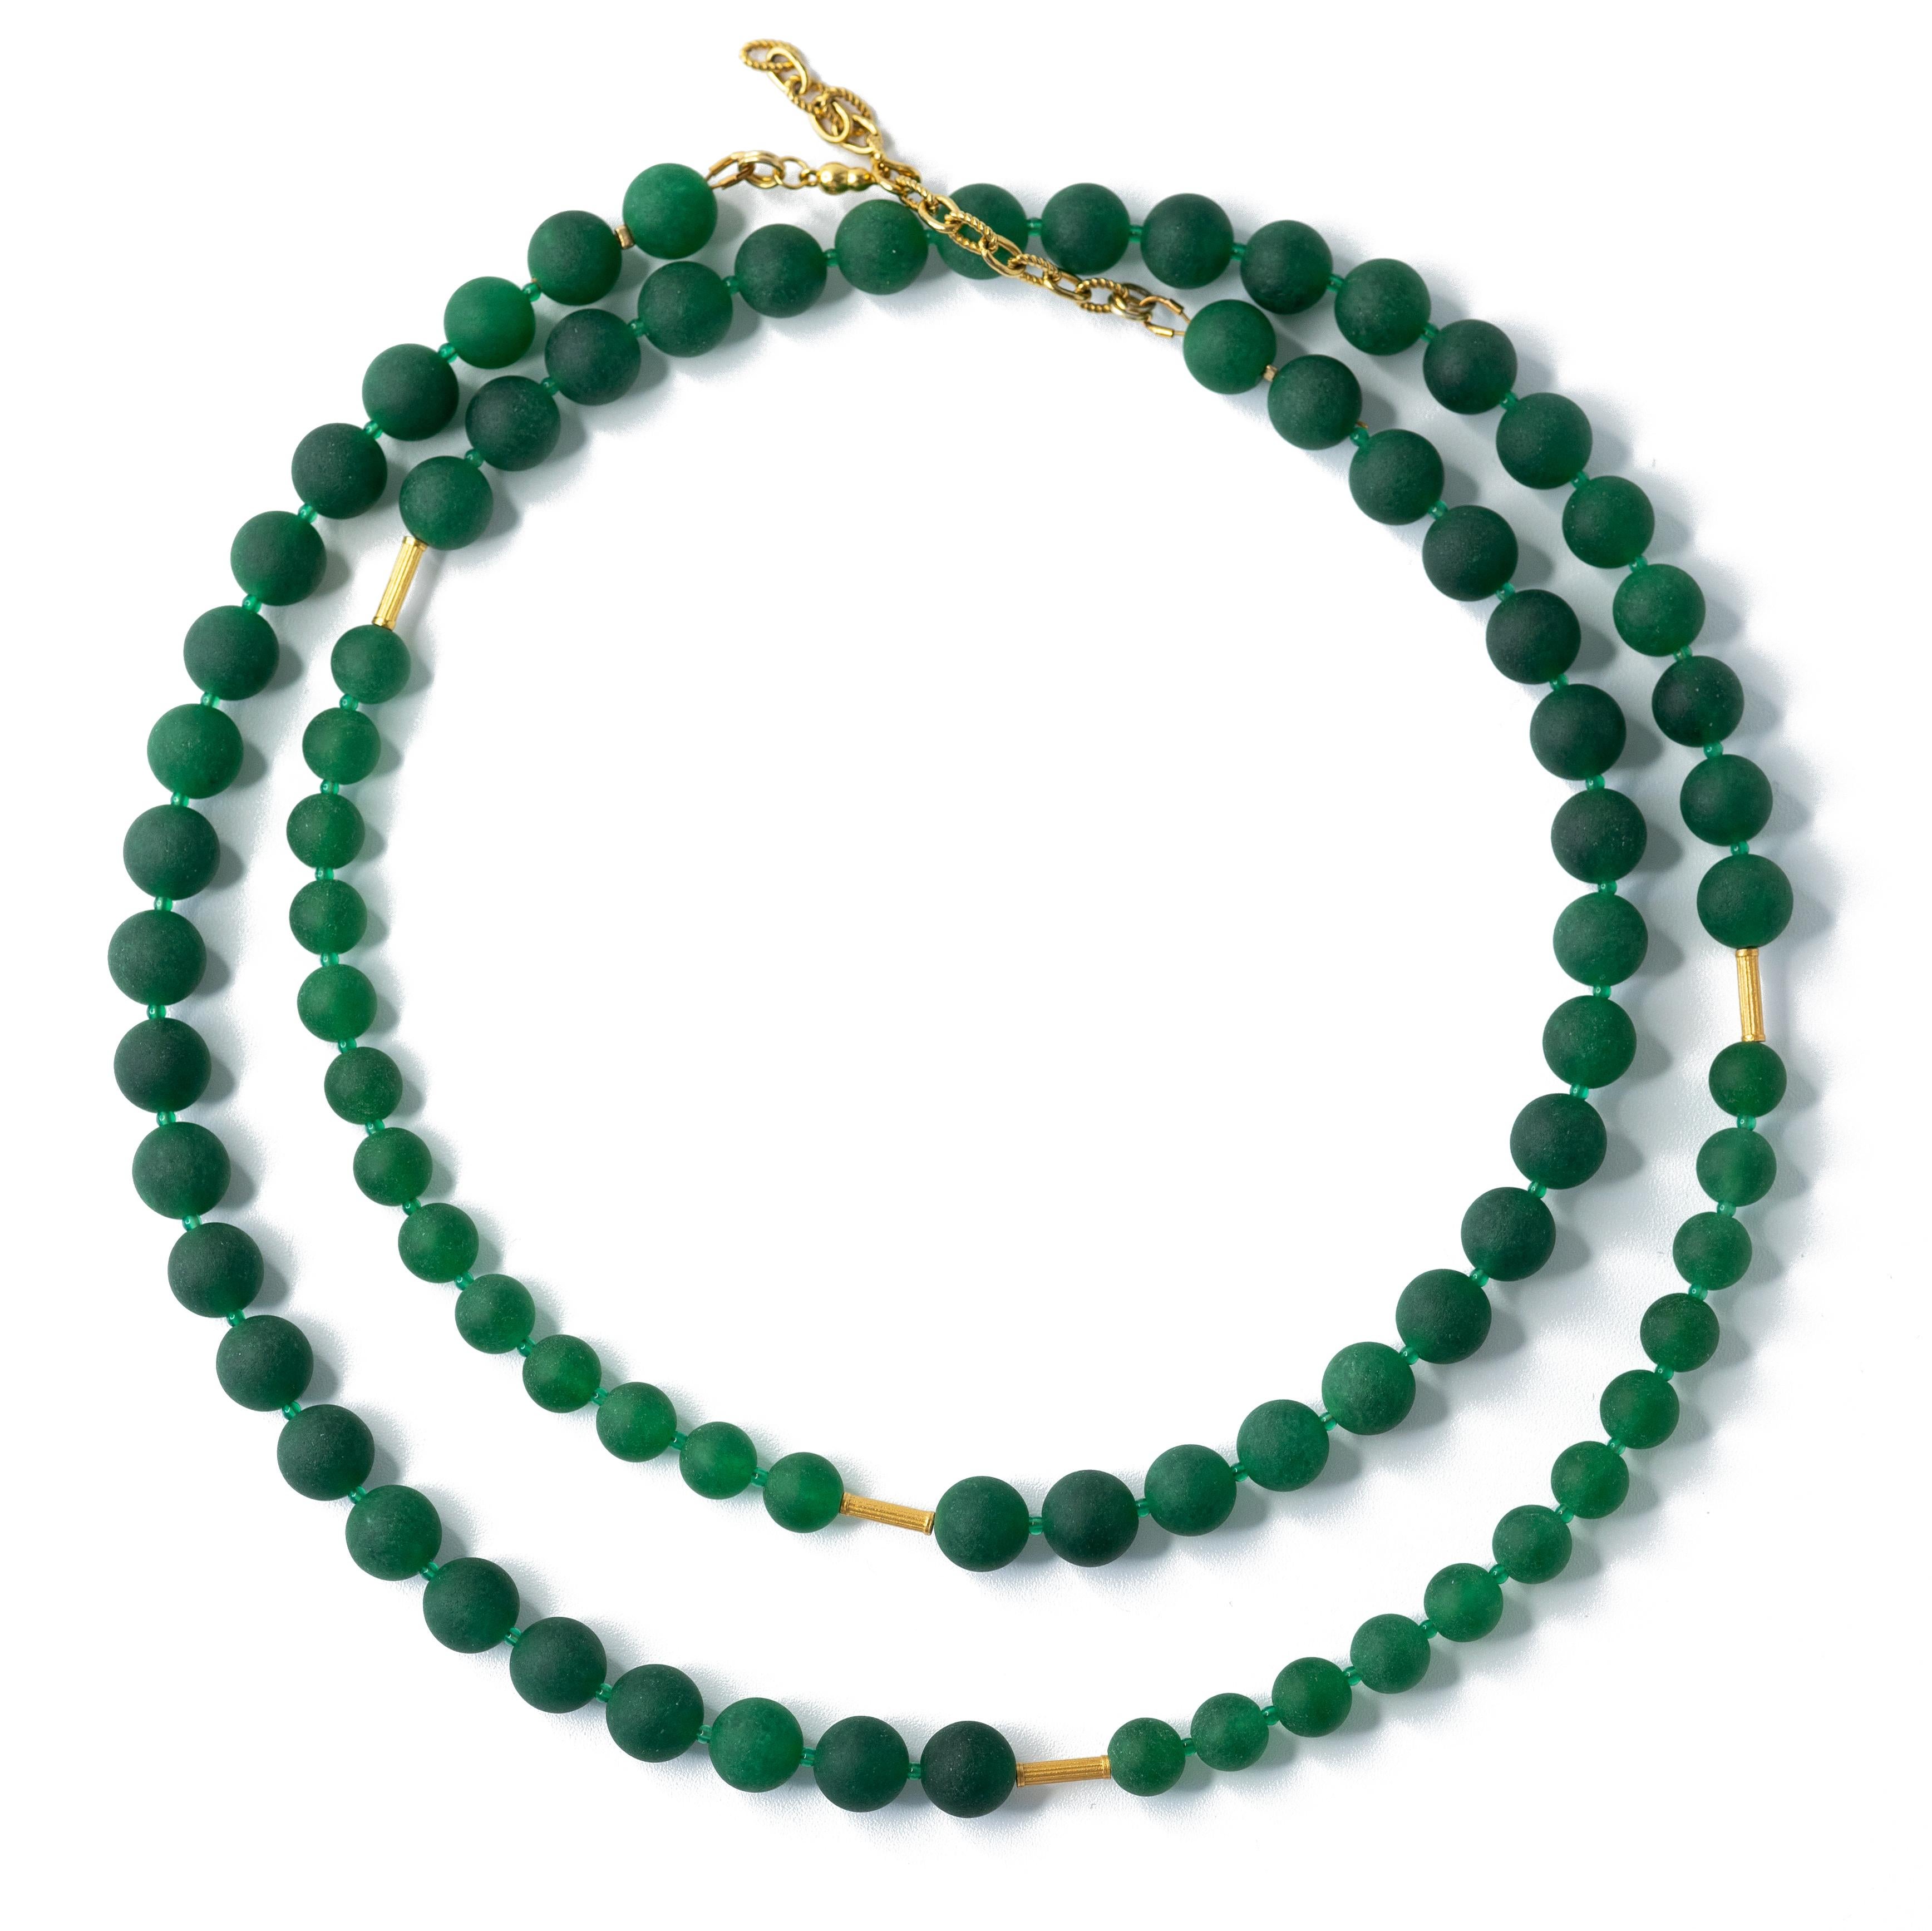 Green Chalcedony Beads and Gold Necklace -The Poet's Garden by Bombyx House For Sale 4